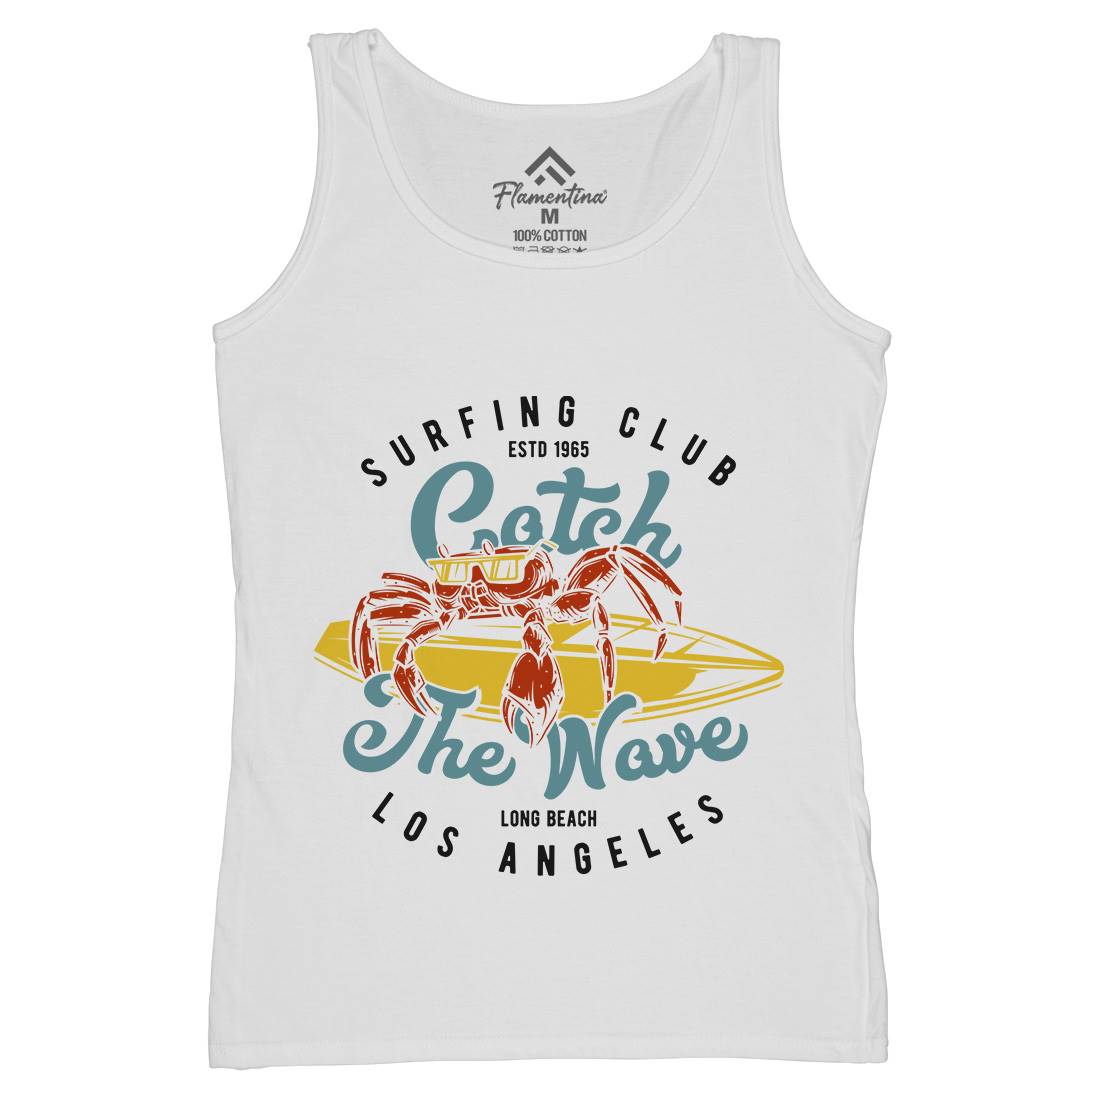 Catch The Wave Surfing Womens Organic Tank Top Vest Surf B877